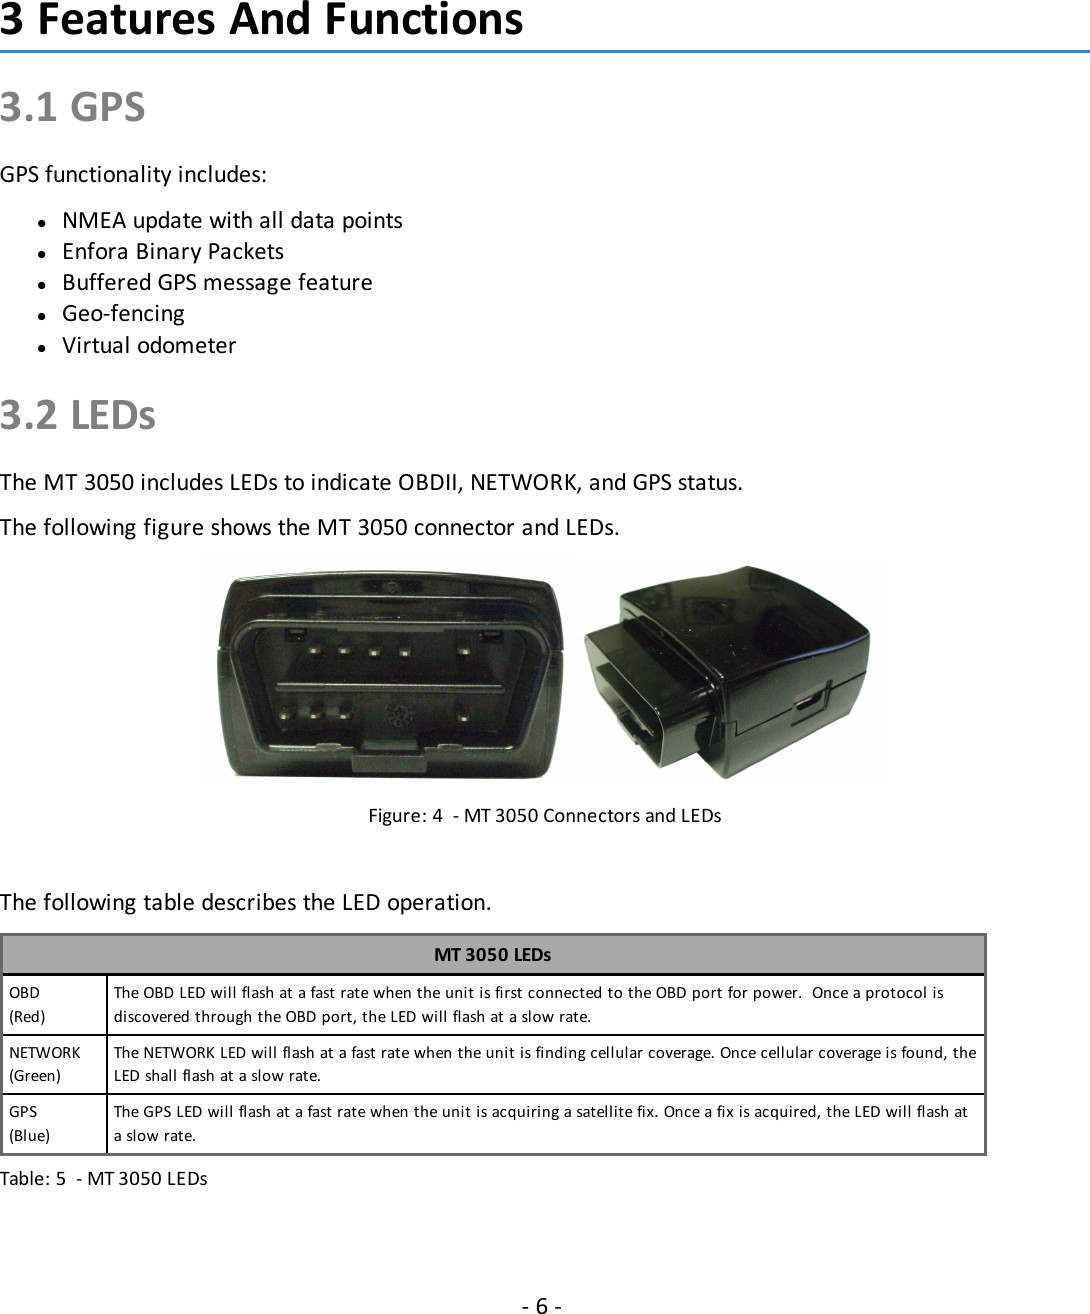 - 6 -3 Features And Functions3.1 GPSGPS functionality includes:lNMEA update with all data pointslEnfora Binary PacketslBuffered GPS message featurelGeo-fencinglVirtual odometer3.2 LEDsThe MT 3050 includes LEDs to indicate OBDII, NETWORK, and GPS status.The following figure shows the MT 3050 connector and LEDs.Figure: 4 - MT 3050 Connectors and LEDsThe following table describes the LED operation.MT 3050 LEDsOBD(Red)The OBD LED will flash at a fast rate when the unit is first connected to the OBD port for power. Once a protocol isdiscovered through the OBD port, the LED will flash at a slow rate.NETWORK(Green)The NETWORK LED will flash at a fast rate when the unit is finding cellular coverage. Once cellular coverage is found, theLED shall flash at a slow rate.GPS(Blue)The GPS LED will flash at a fast rate when the unit is acquiring a satellite fix. Once a fix is acquired, the LED will flash ata slow rate.Table: 5 - MT 3050 LEDs